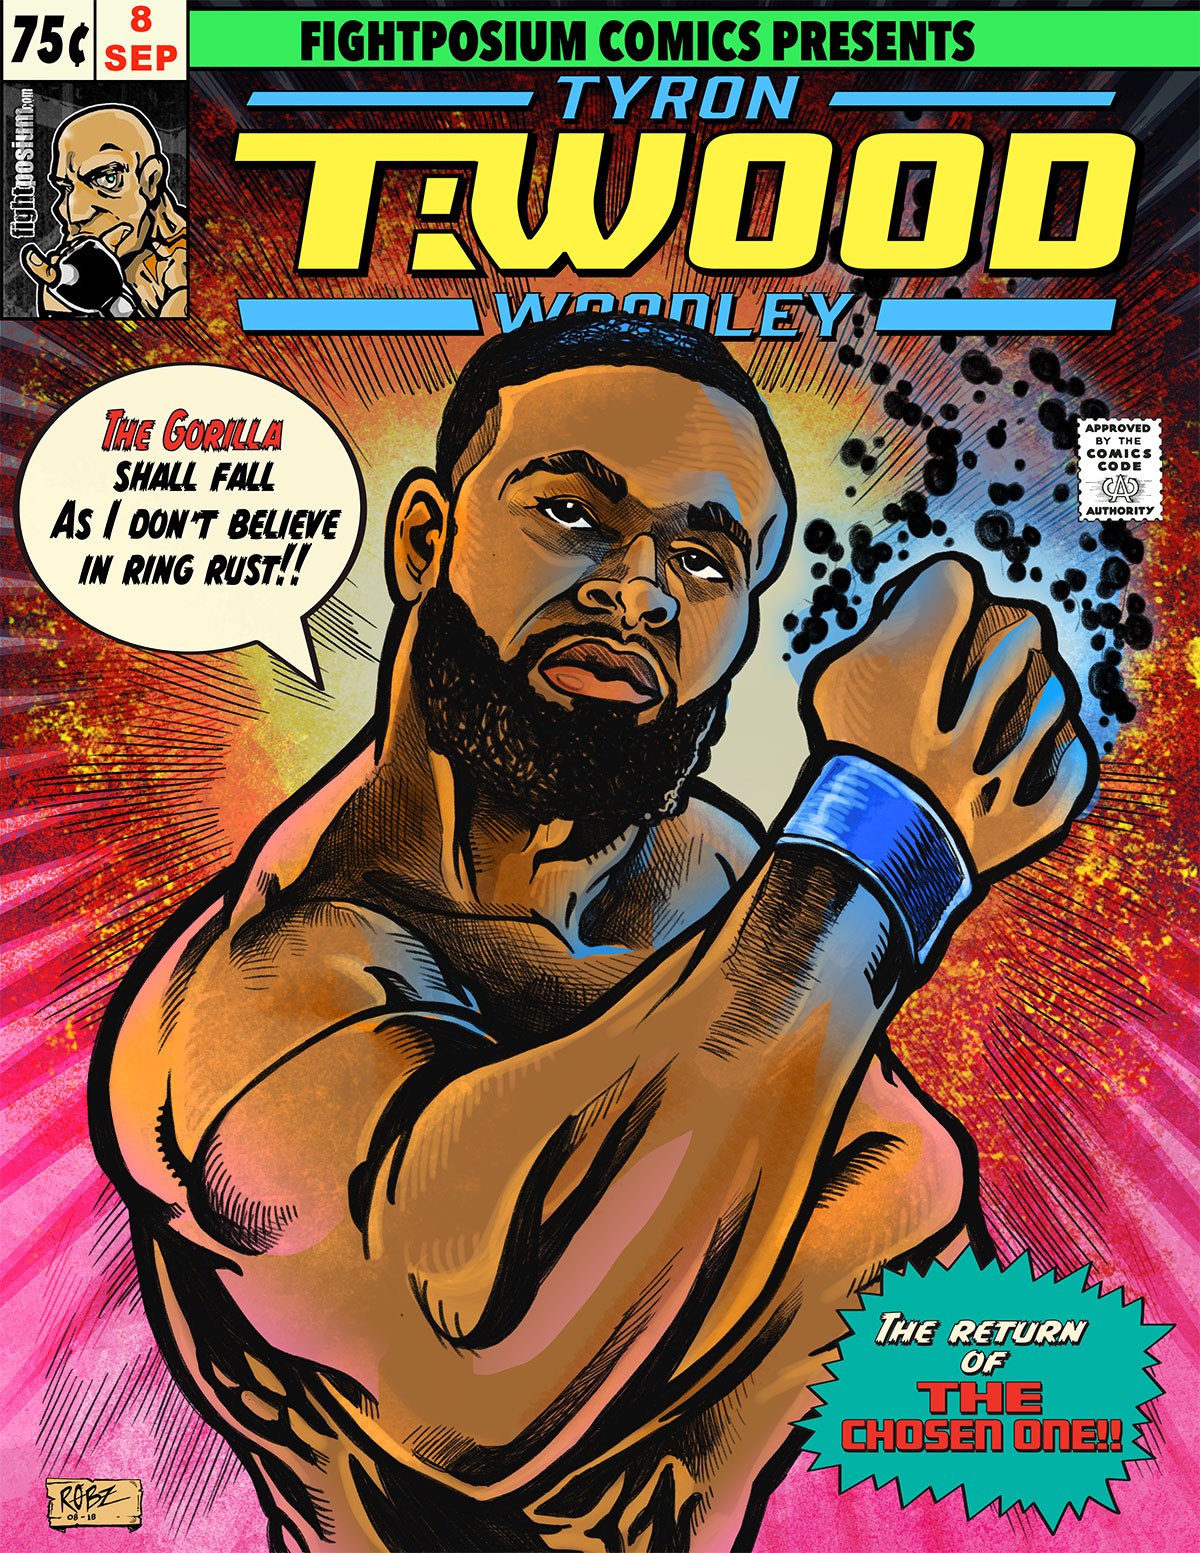 Tyron "T-Wood" Woodley - The Return of The Chosen One!